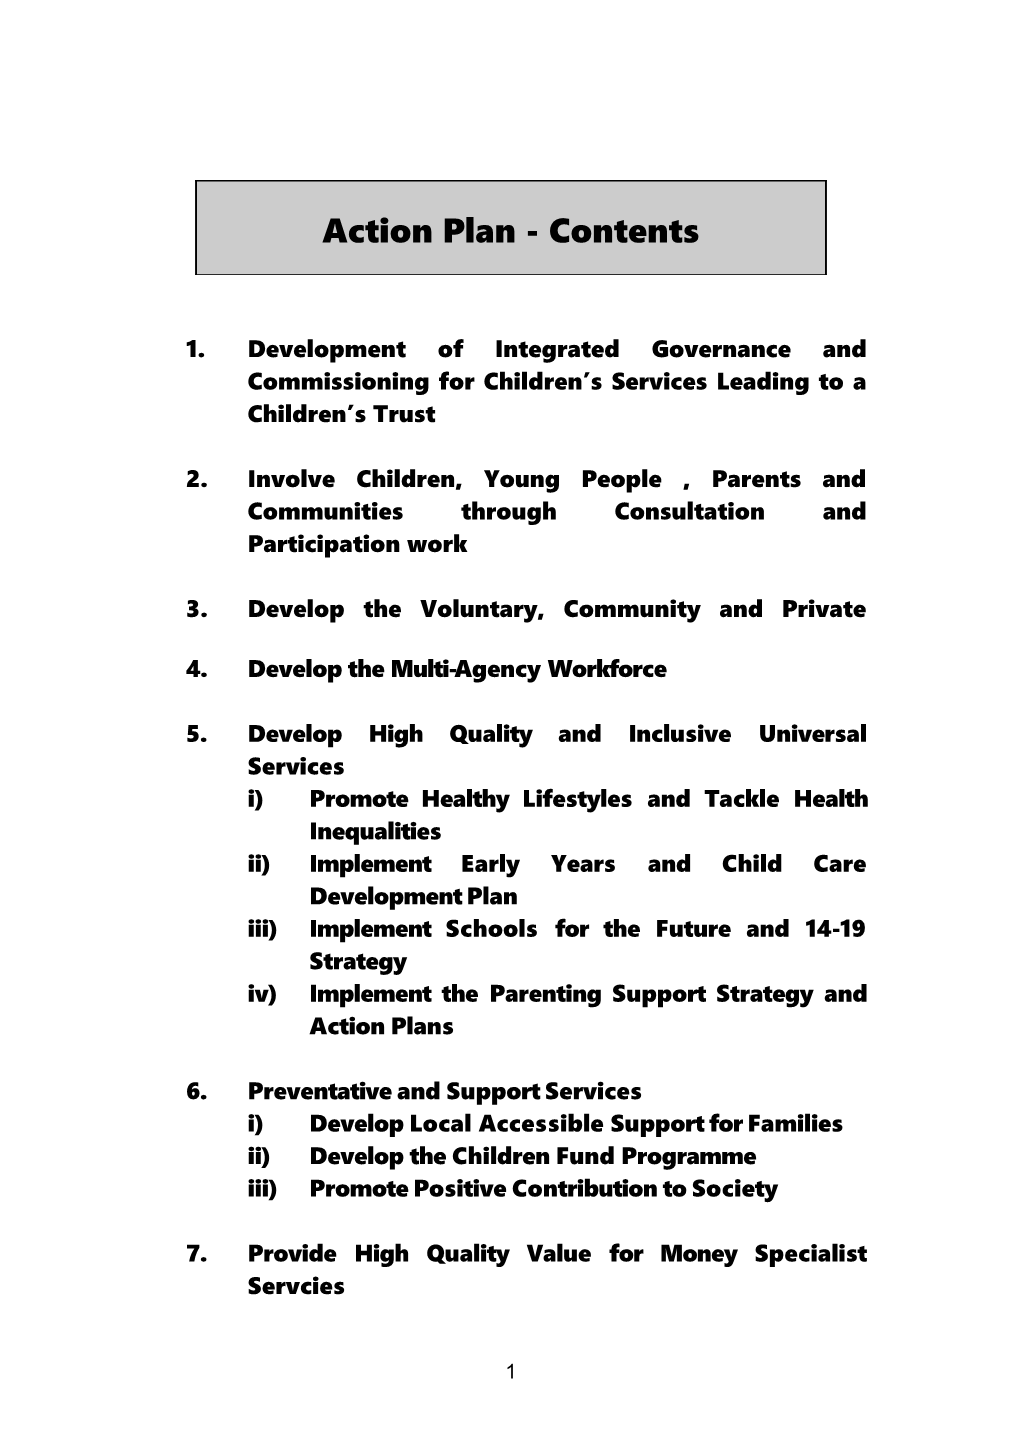 Action Plan - Contents